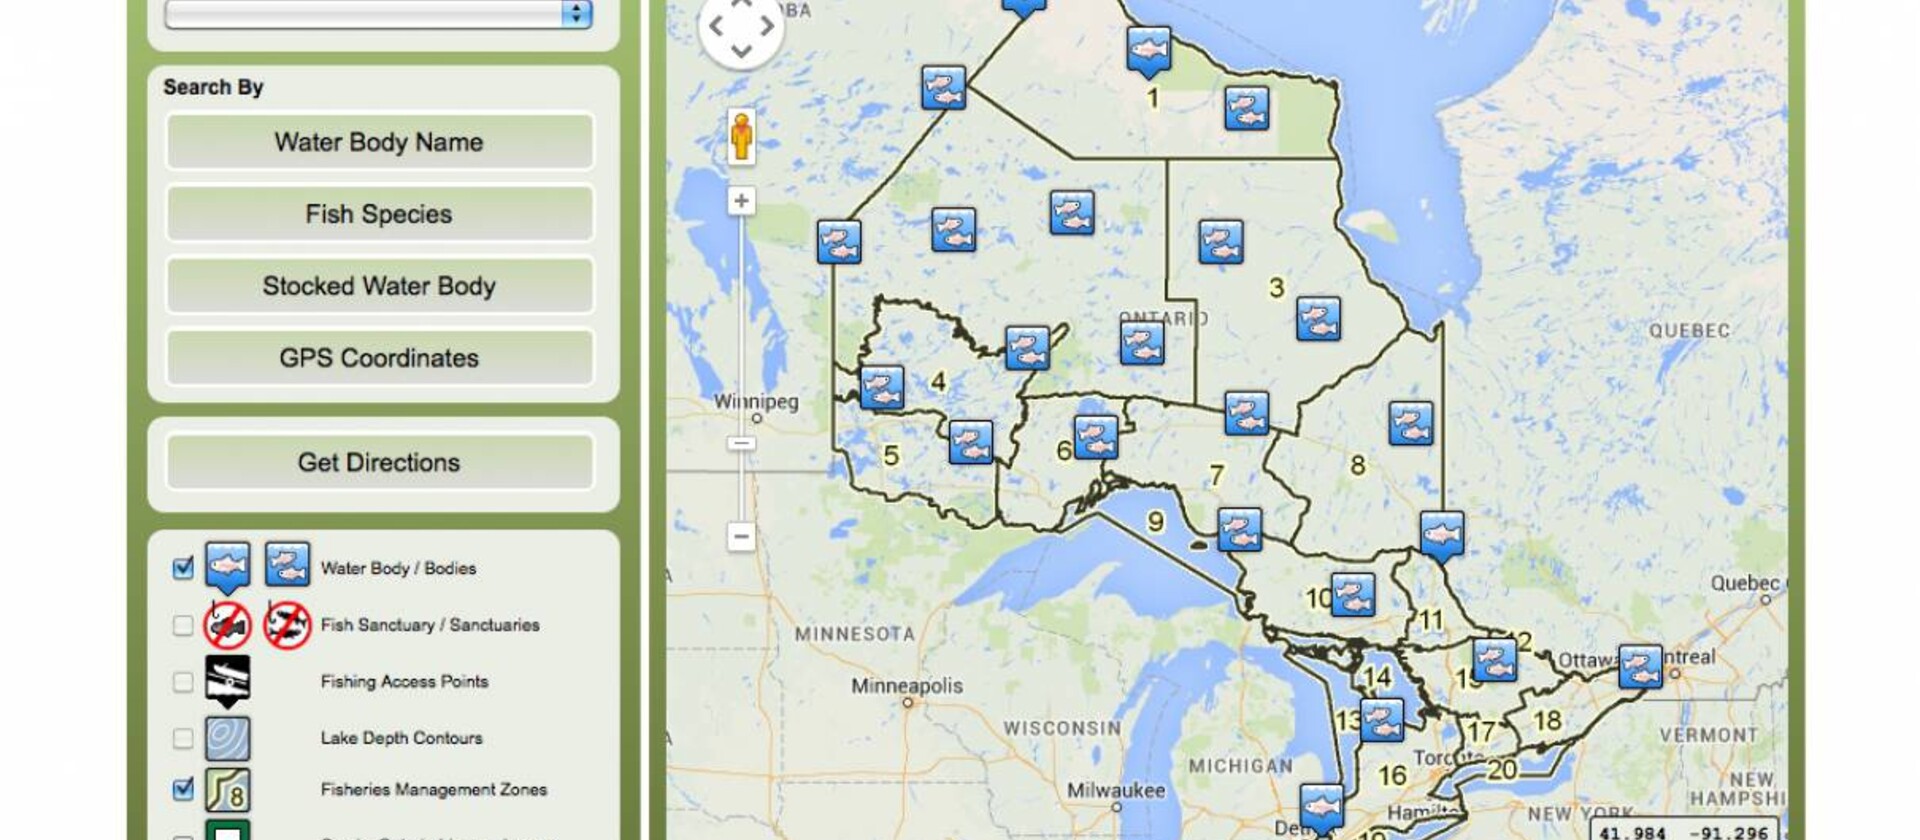 Online Map to Find Out Which Fish Species Are in Ontario Lakes